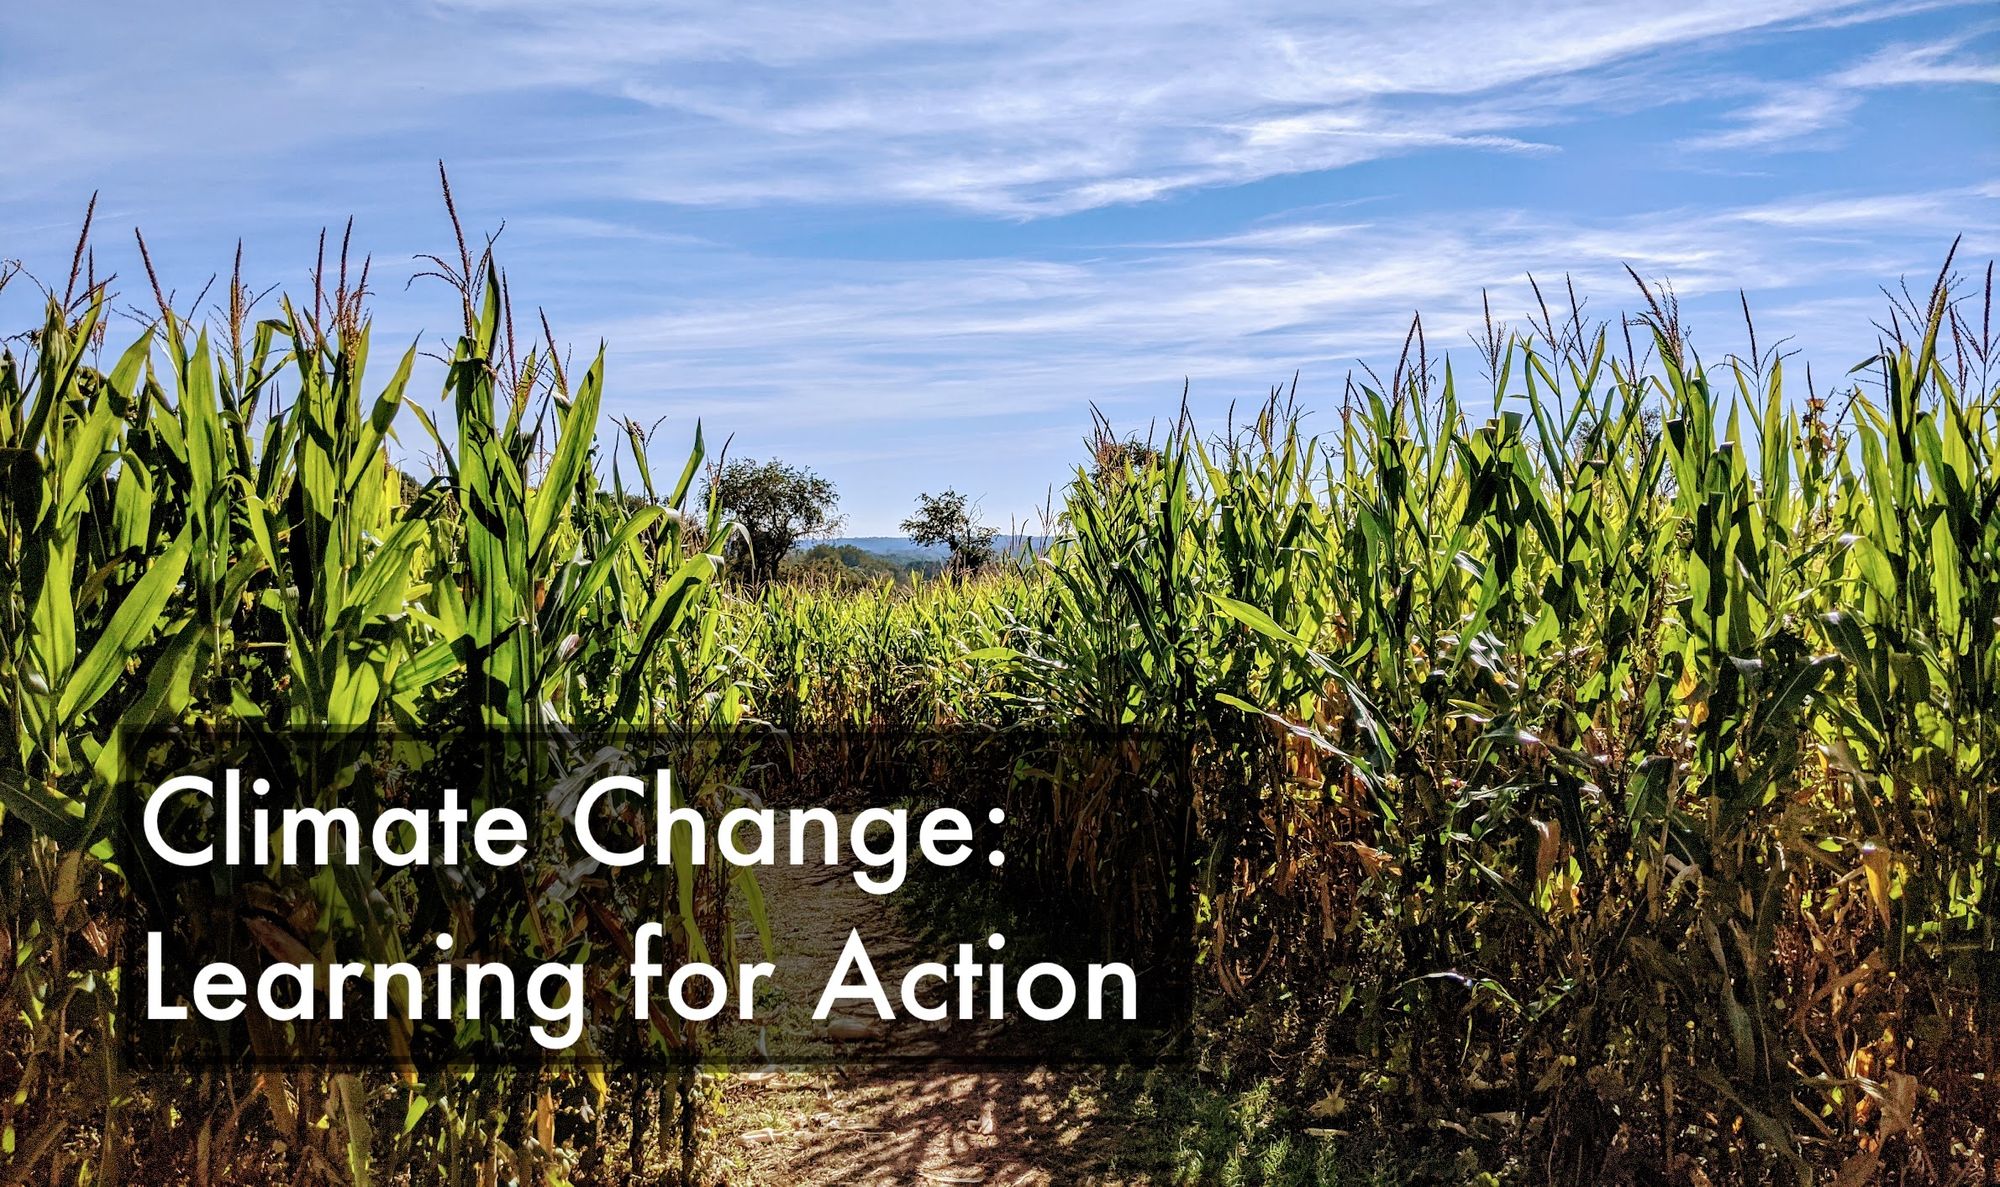 Course Review of Climate Change: Learning for Action by Terra.do